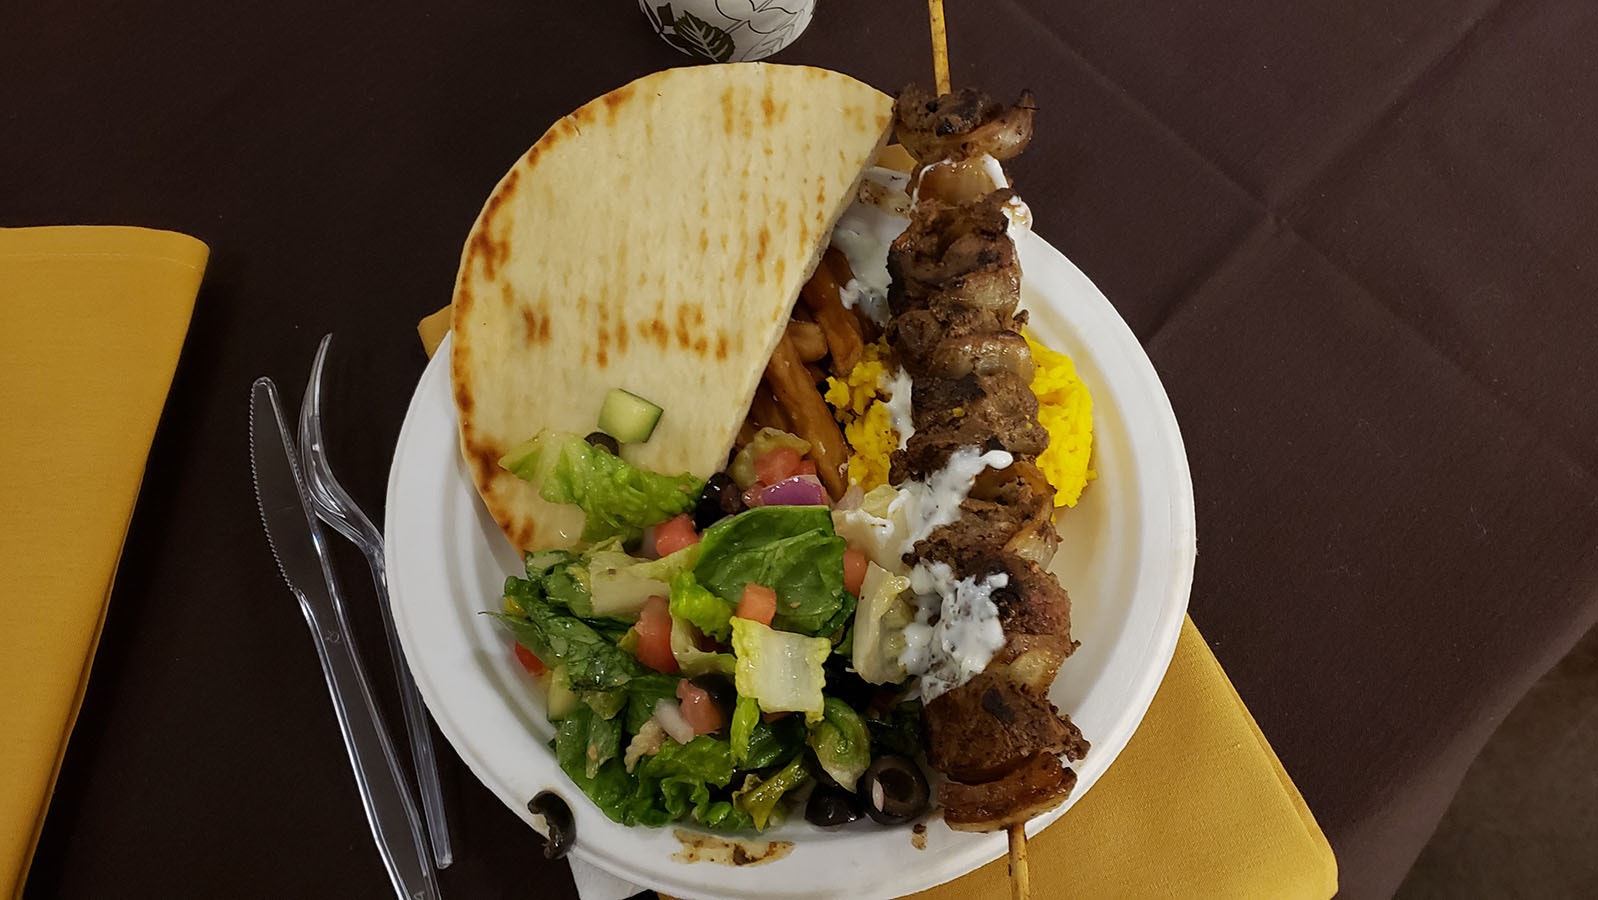 Lamb kebabs with rice salad and pita bread makes a delicious fast dinner at a local Kemmerer restaurant.